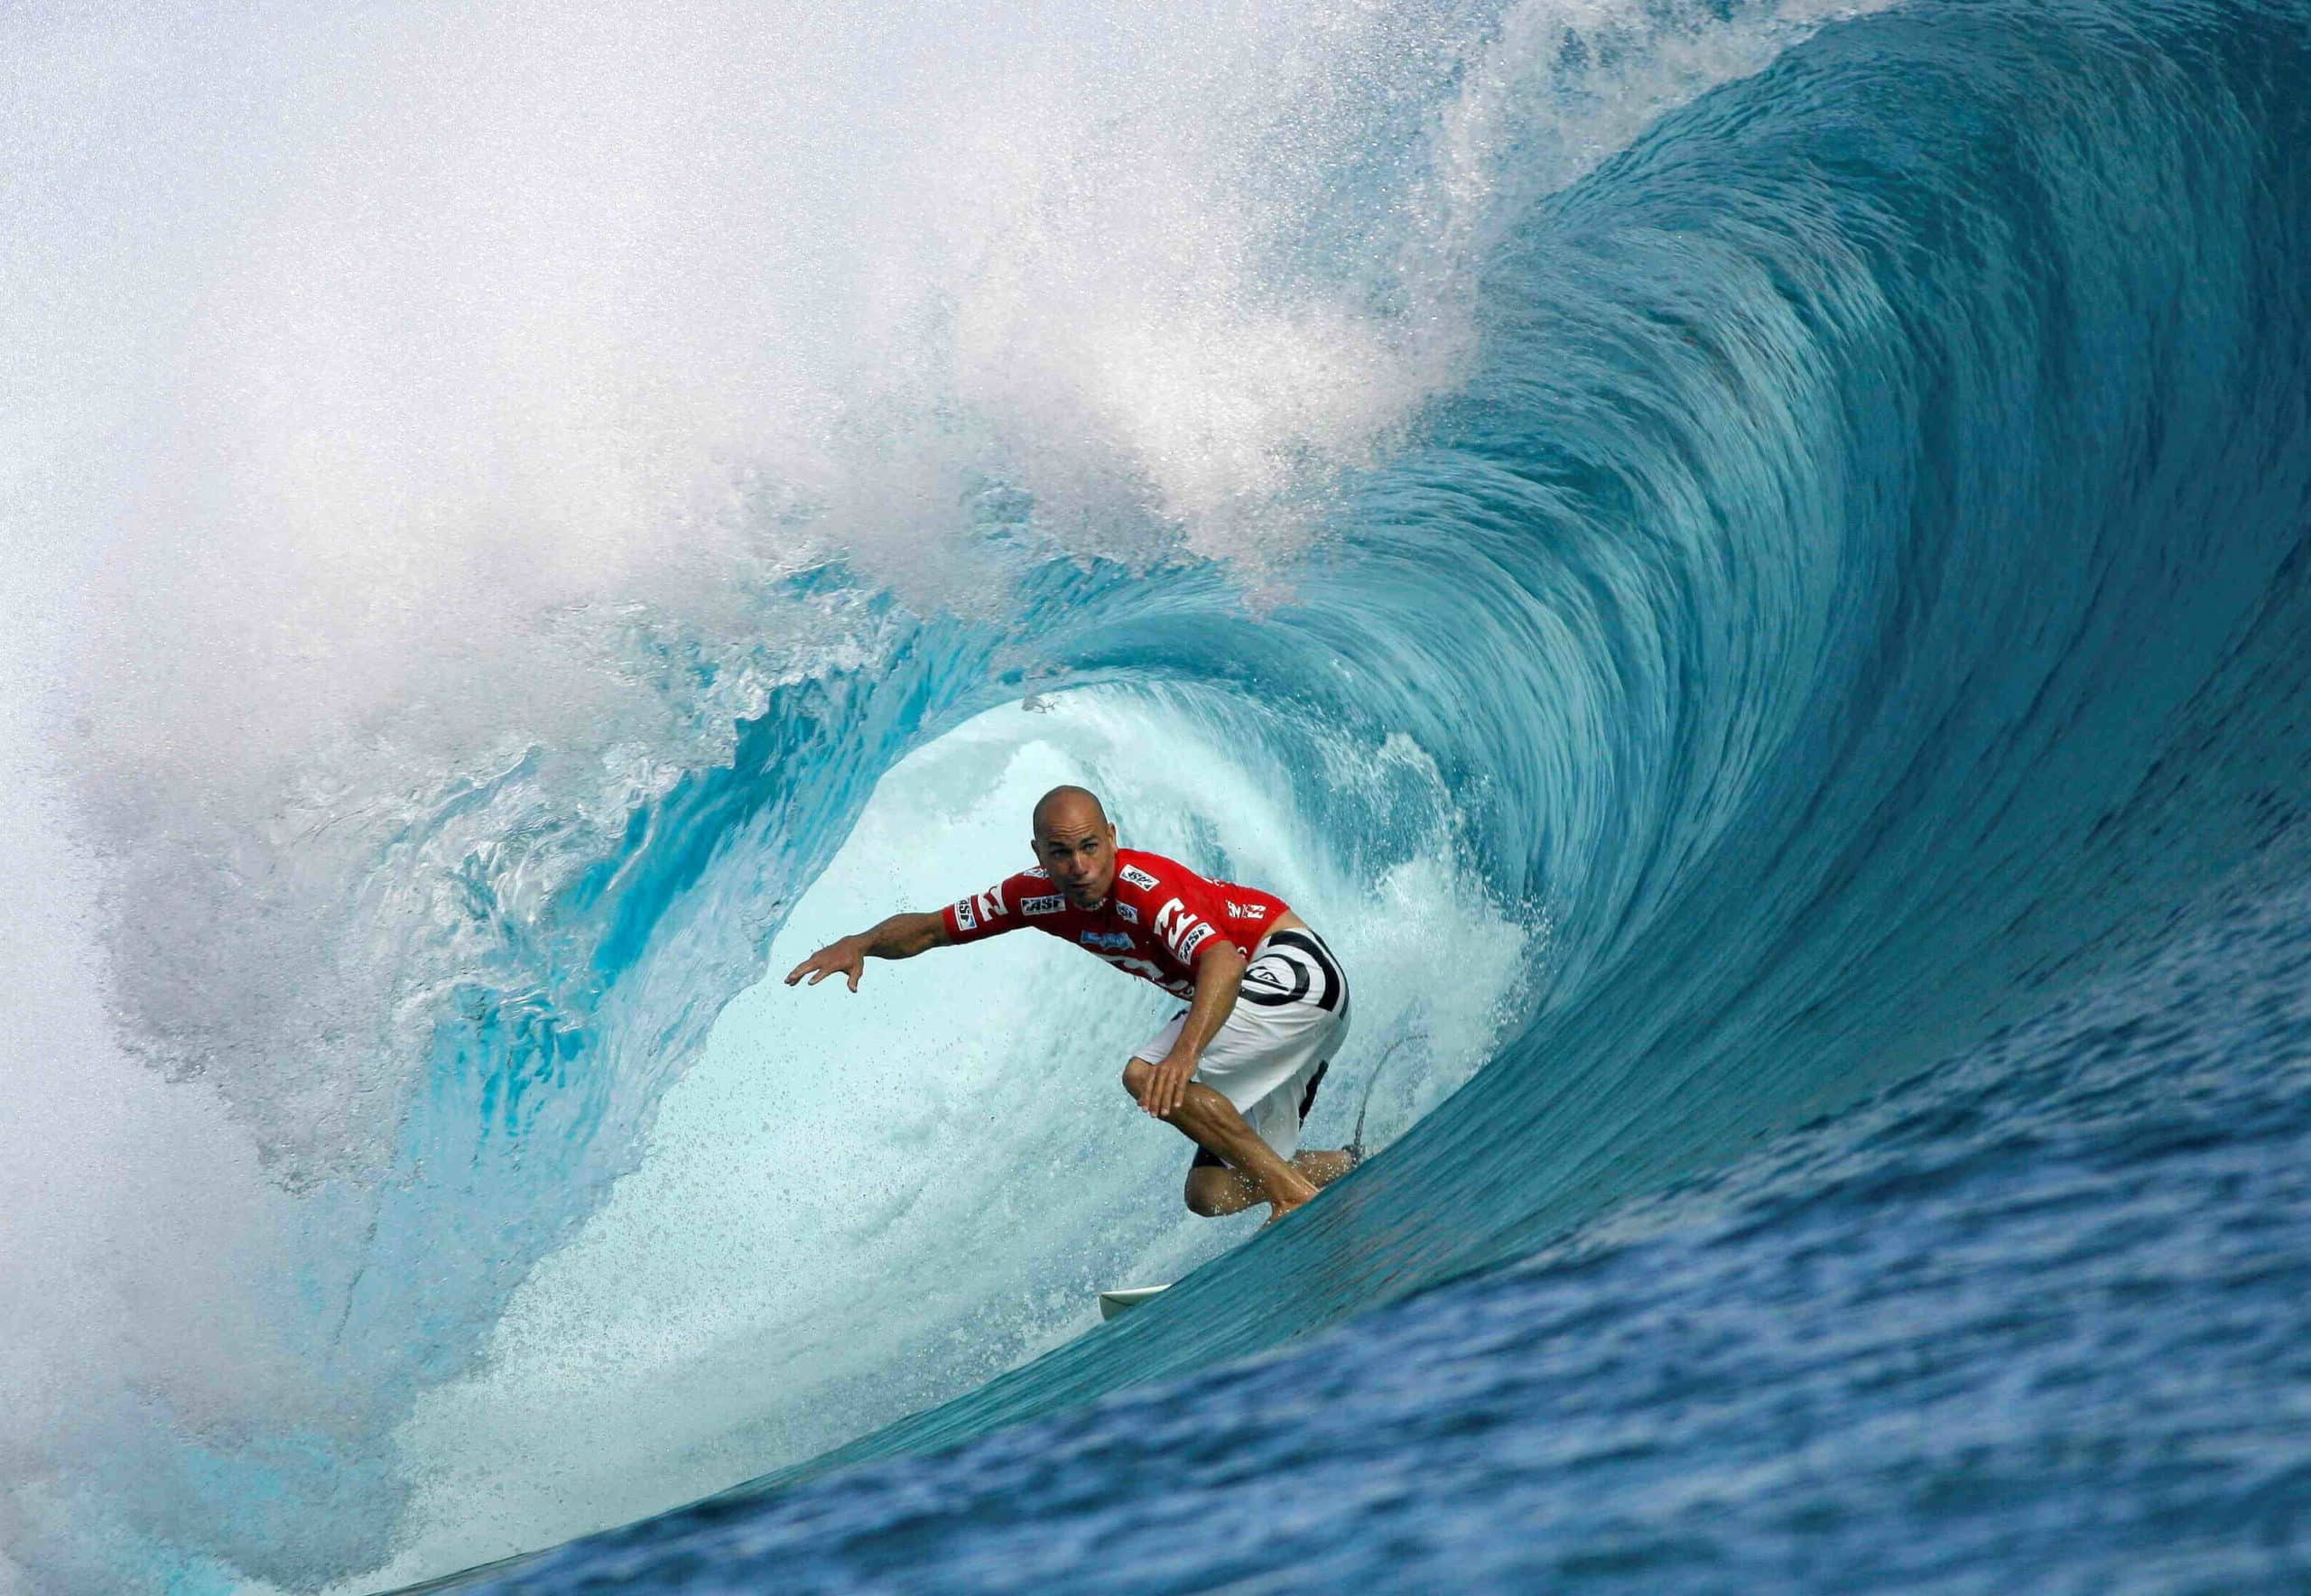 What is Kelly Slater ranked?